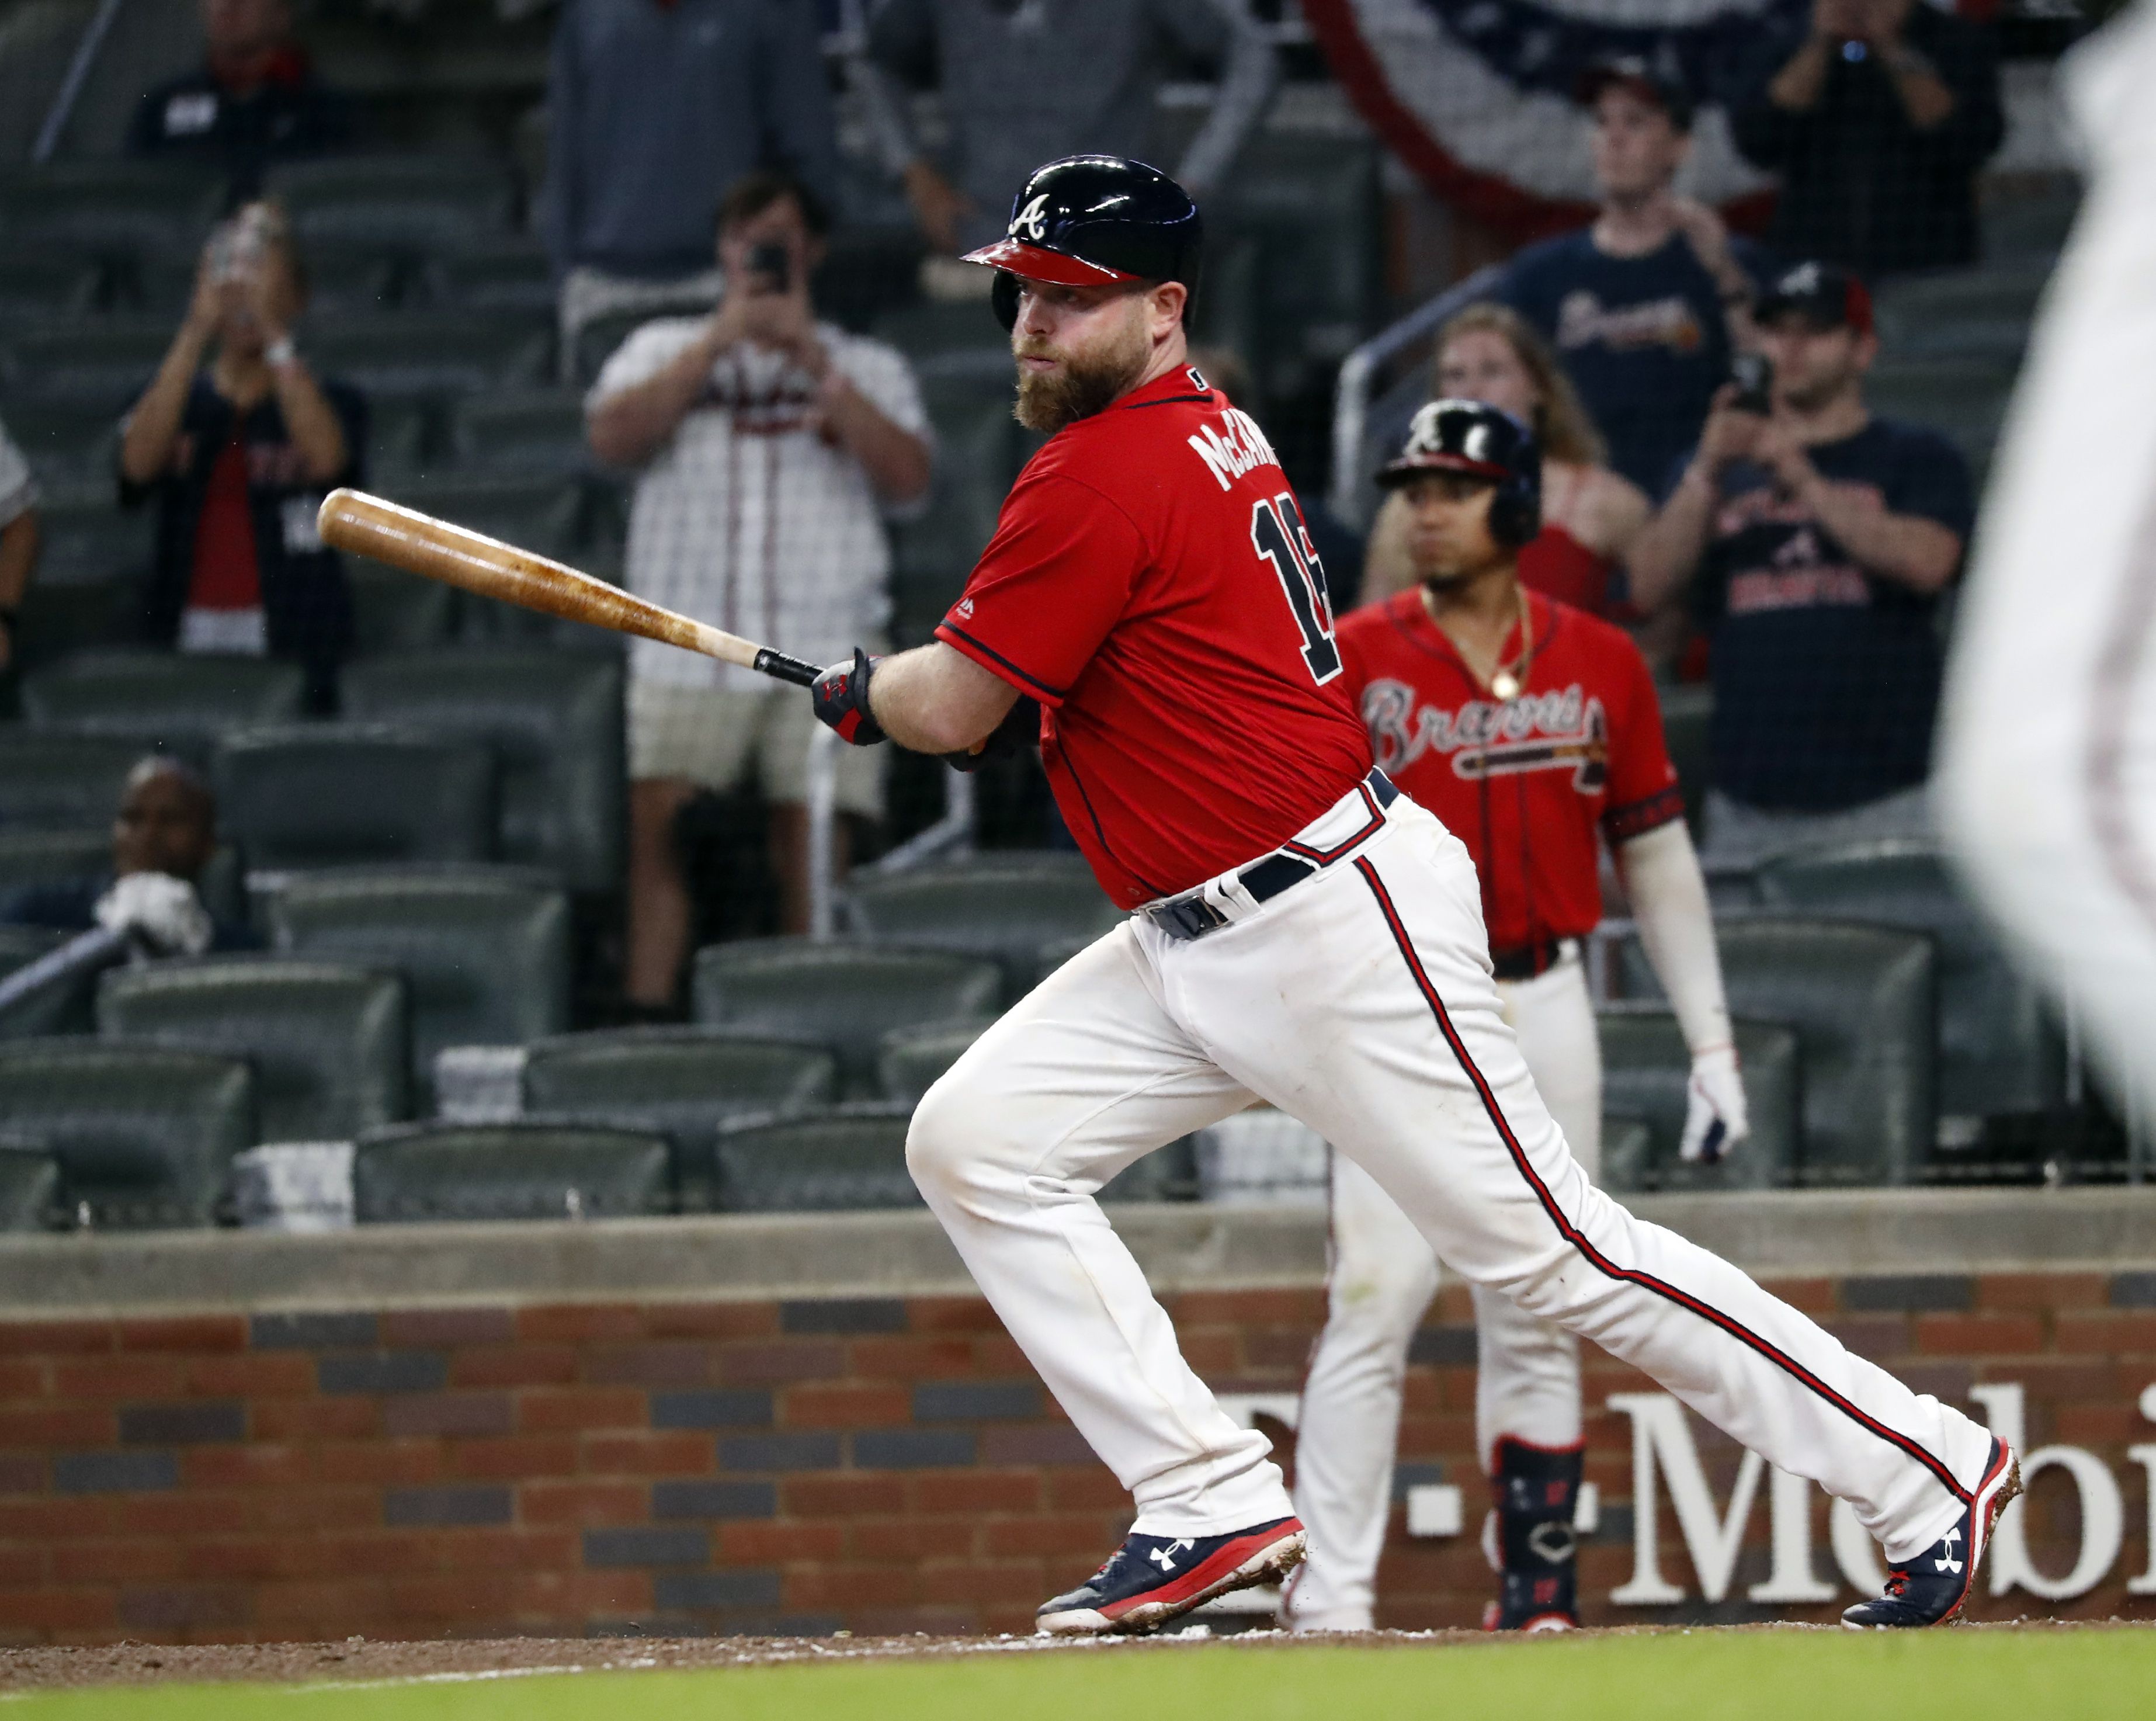 Atlanta Braves Catcher Brian McCann looks on during the game